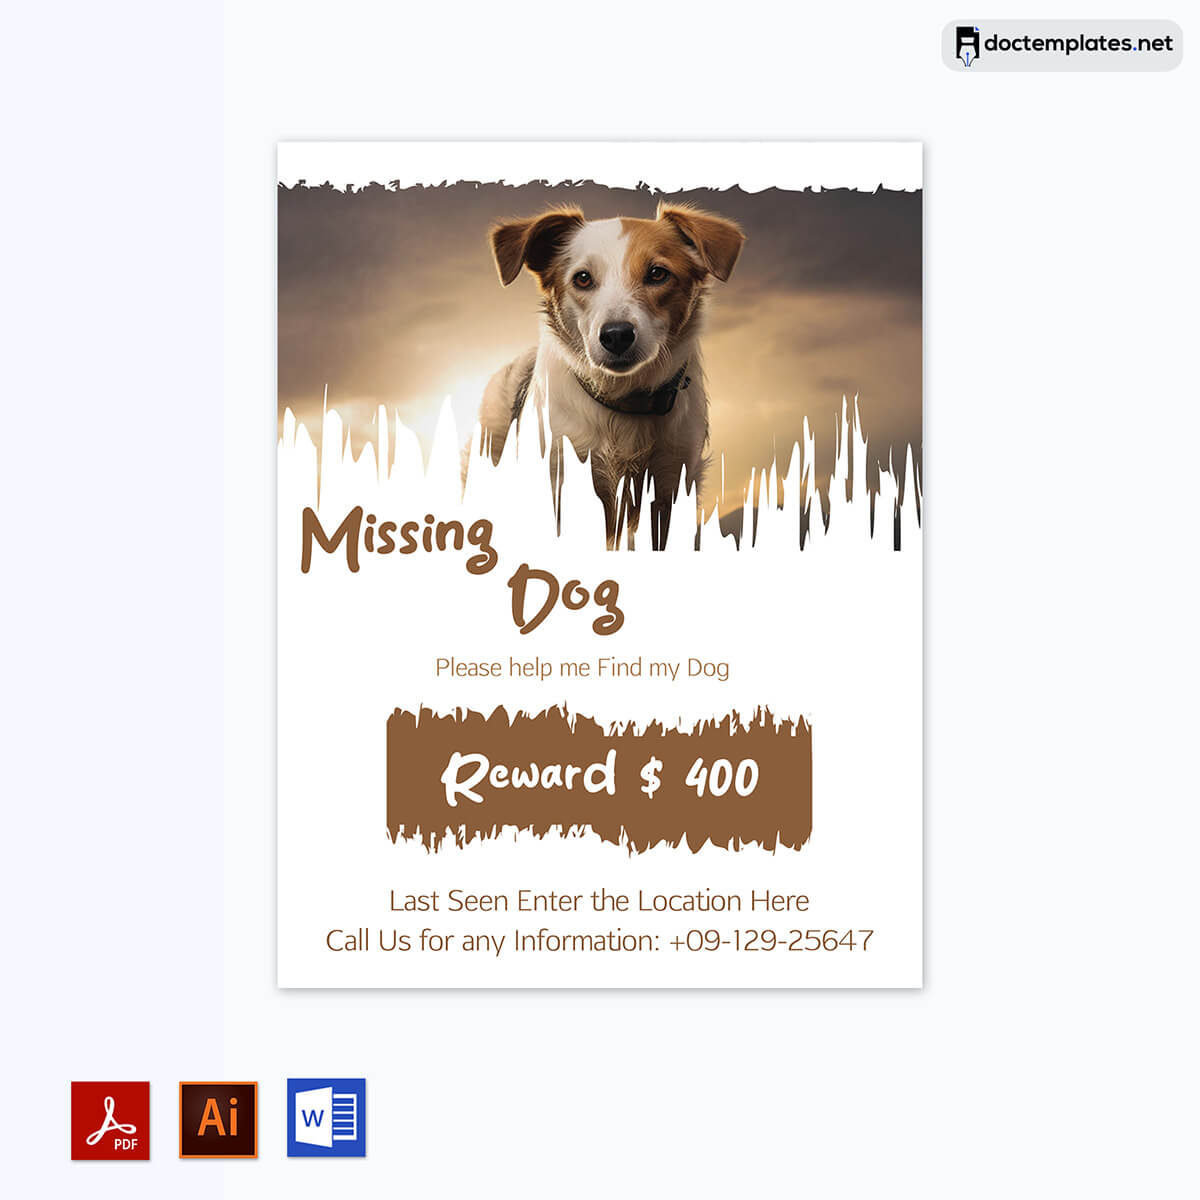 "Pet Search Flyer Design" - Enhance your pet search efforts with this well-designed flyer template for cats and dogs.